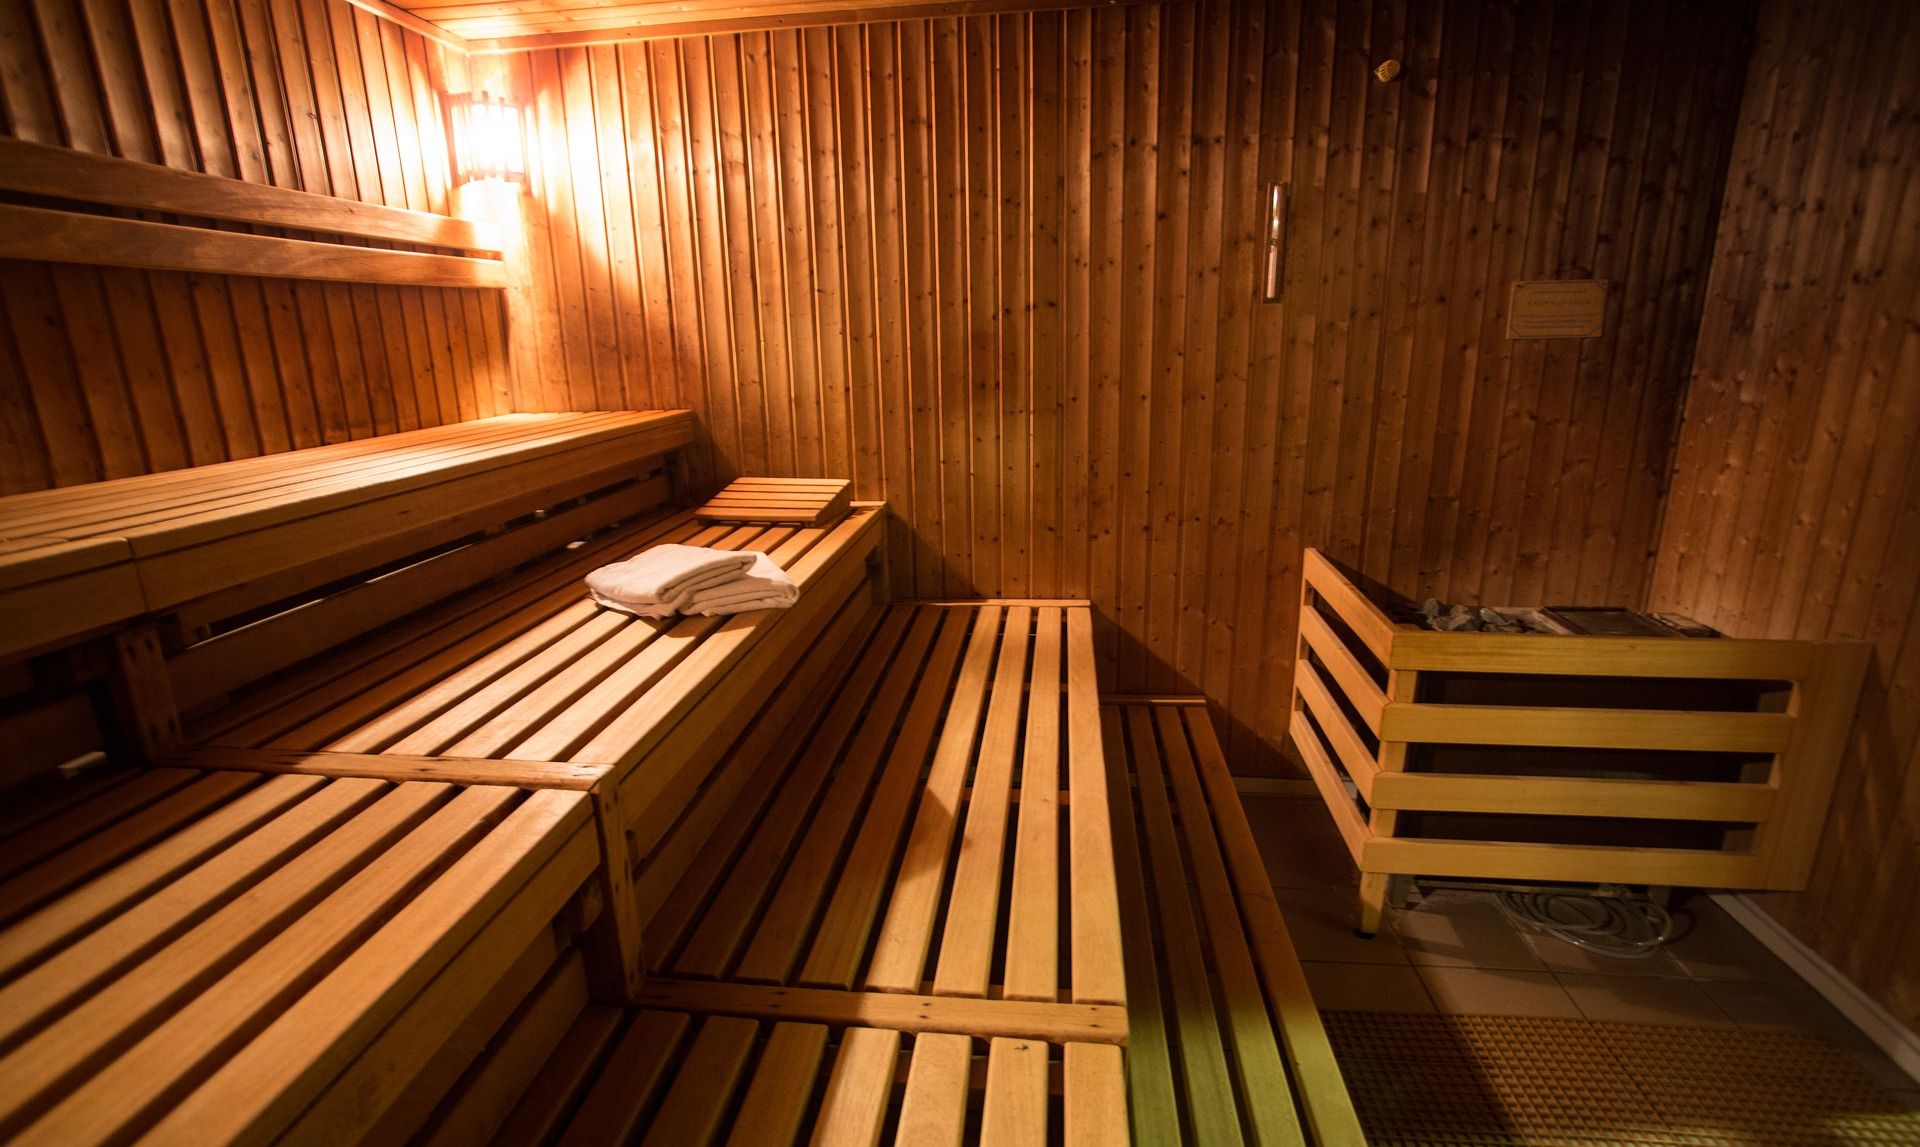 Rating of the best baths and saunas in Voronezh in 2022